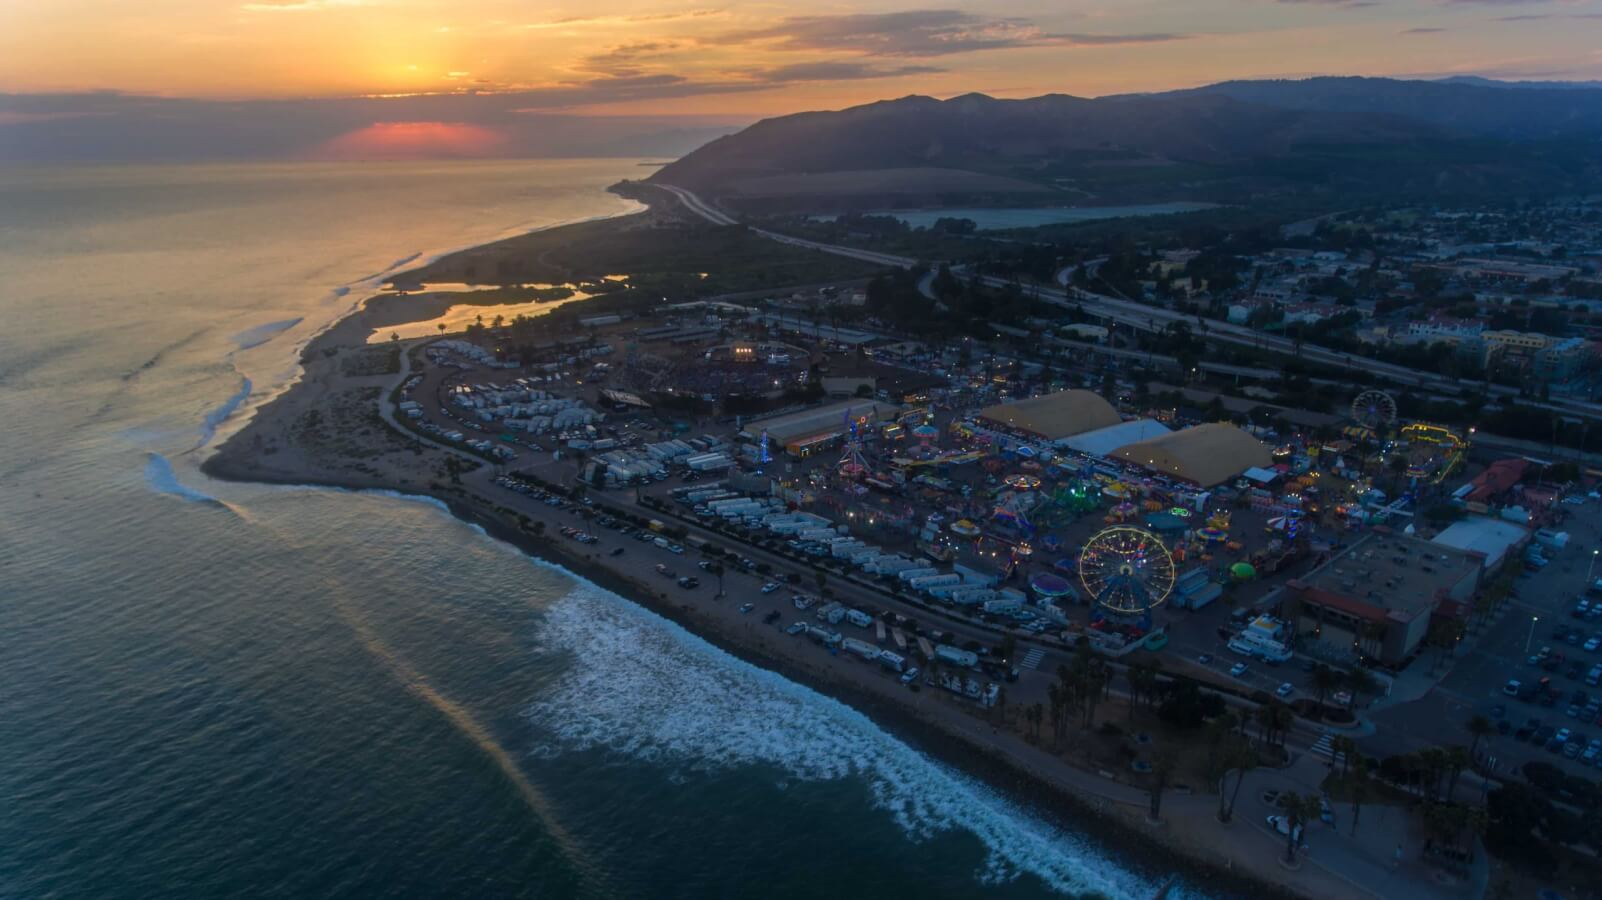 The 2022 Ventura County Fair is Here Big Time